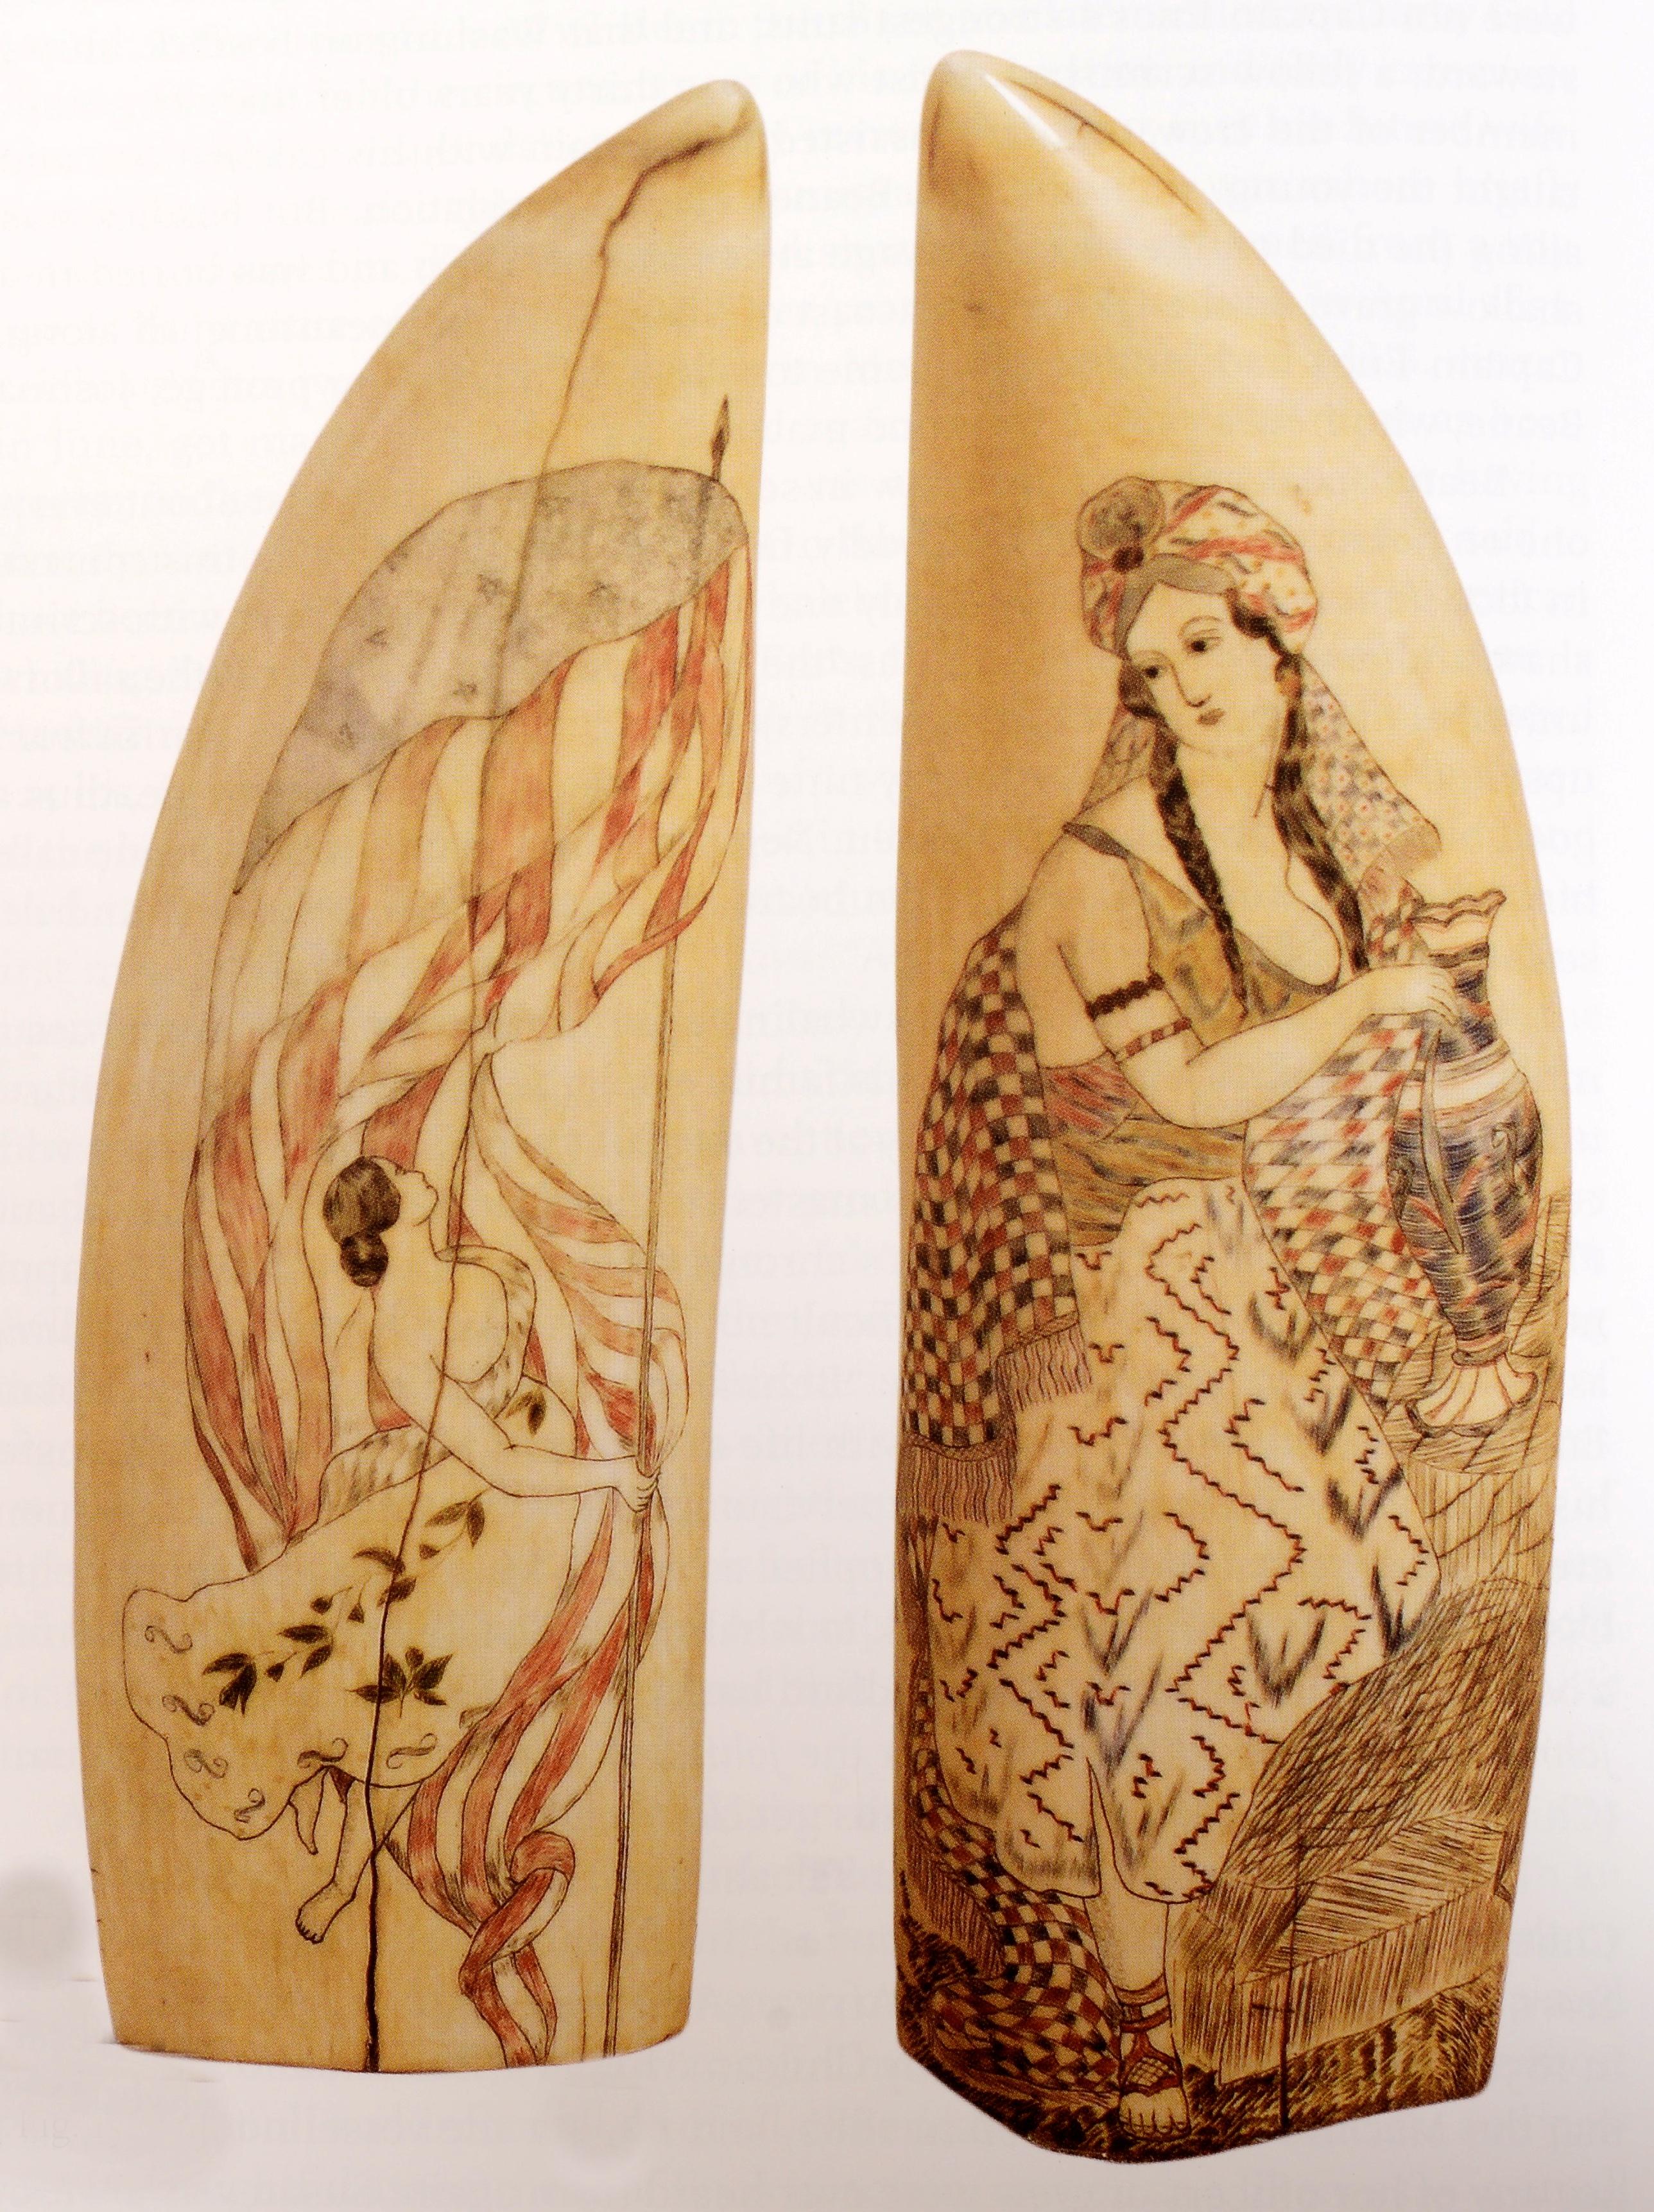 Ingenious Contrivances, Curiously Carved Scrimshaw, New Bedford Whaling Museum For Sale 1